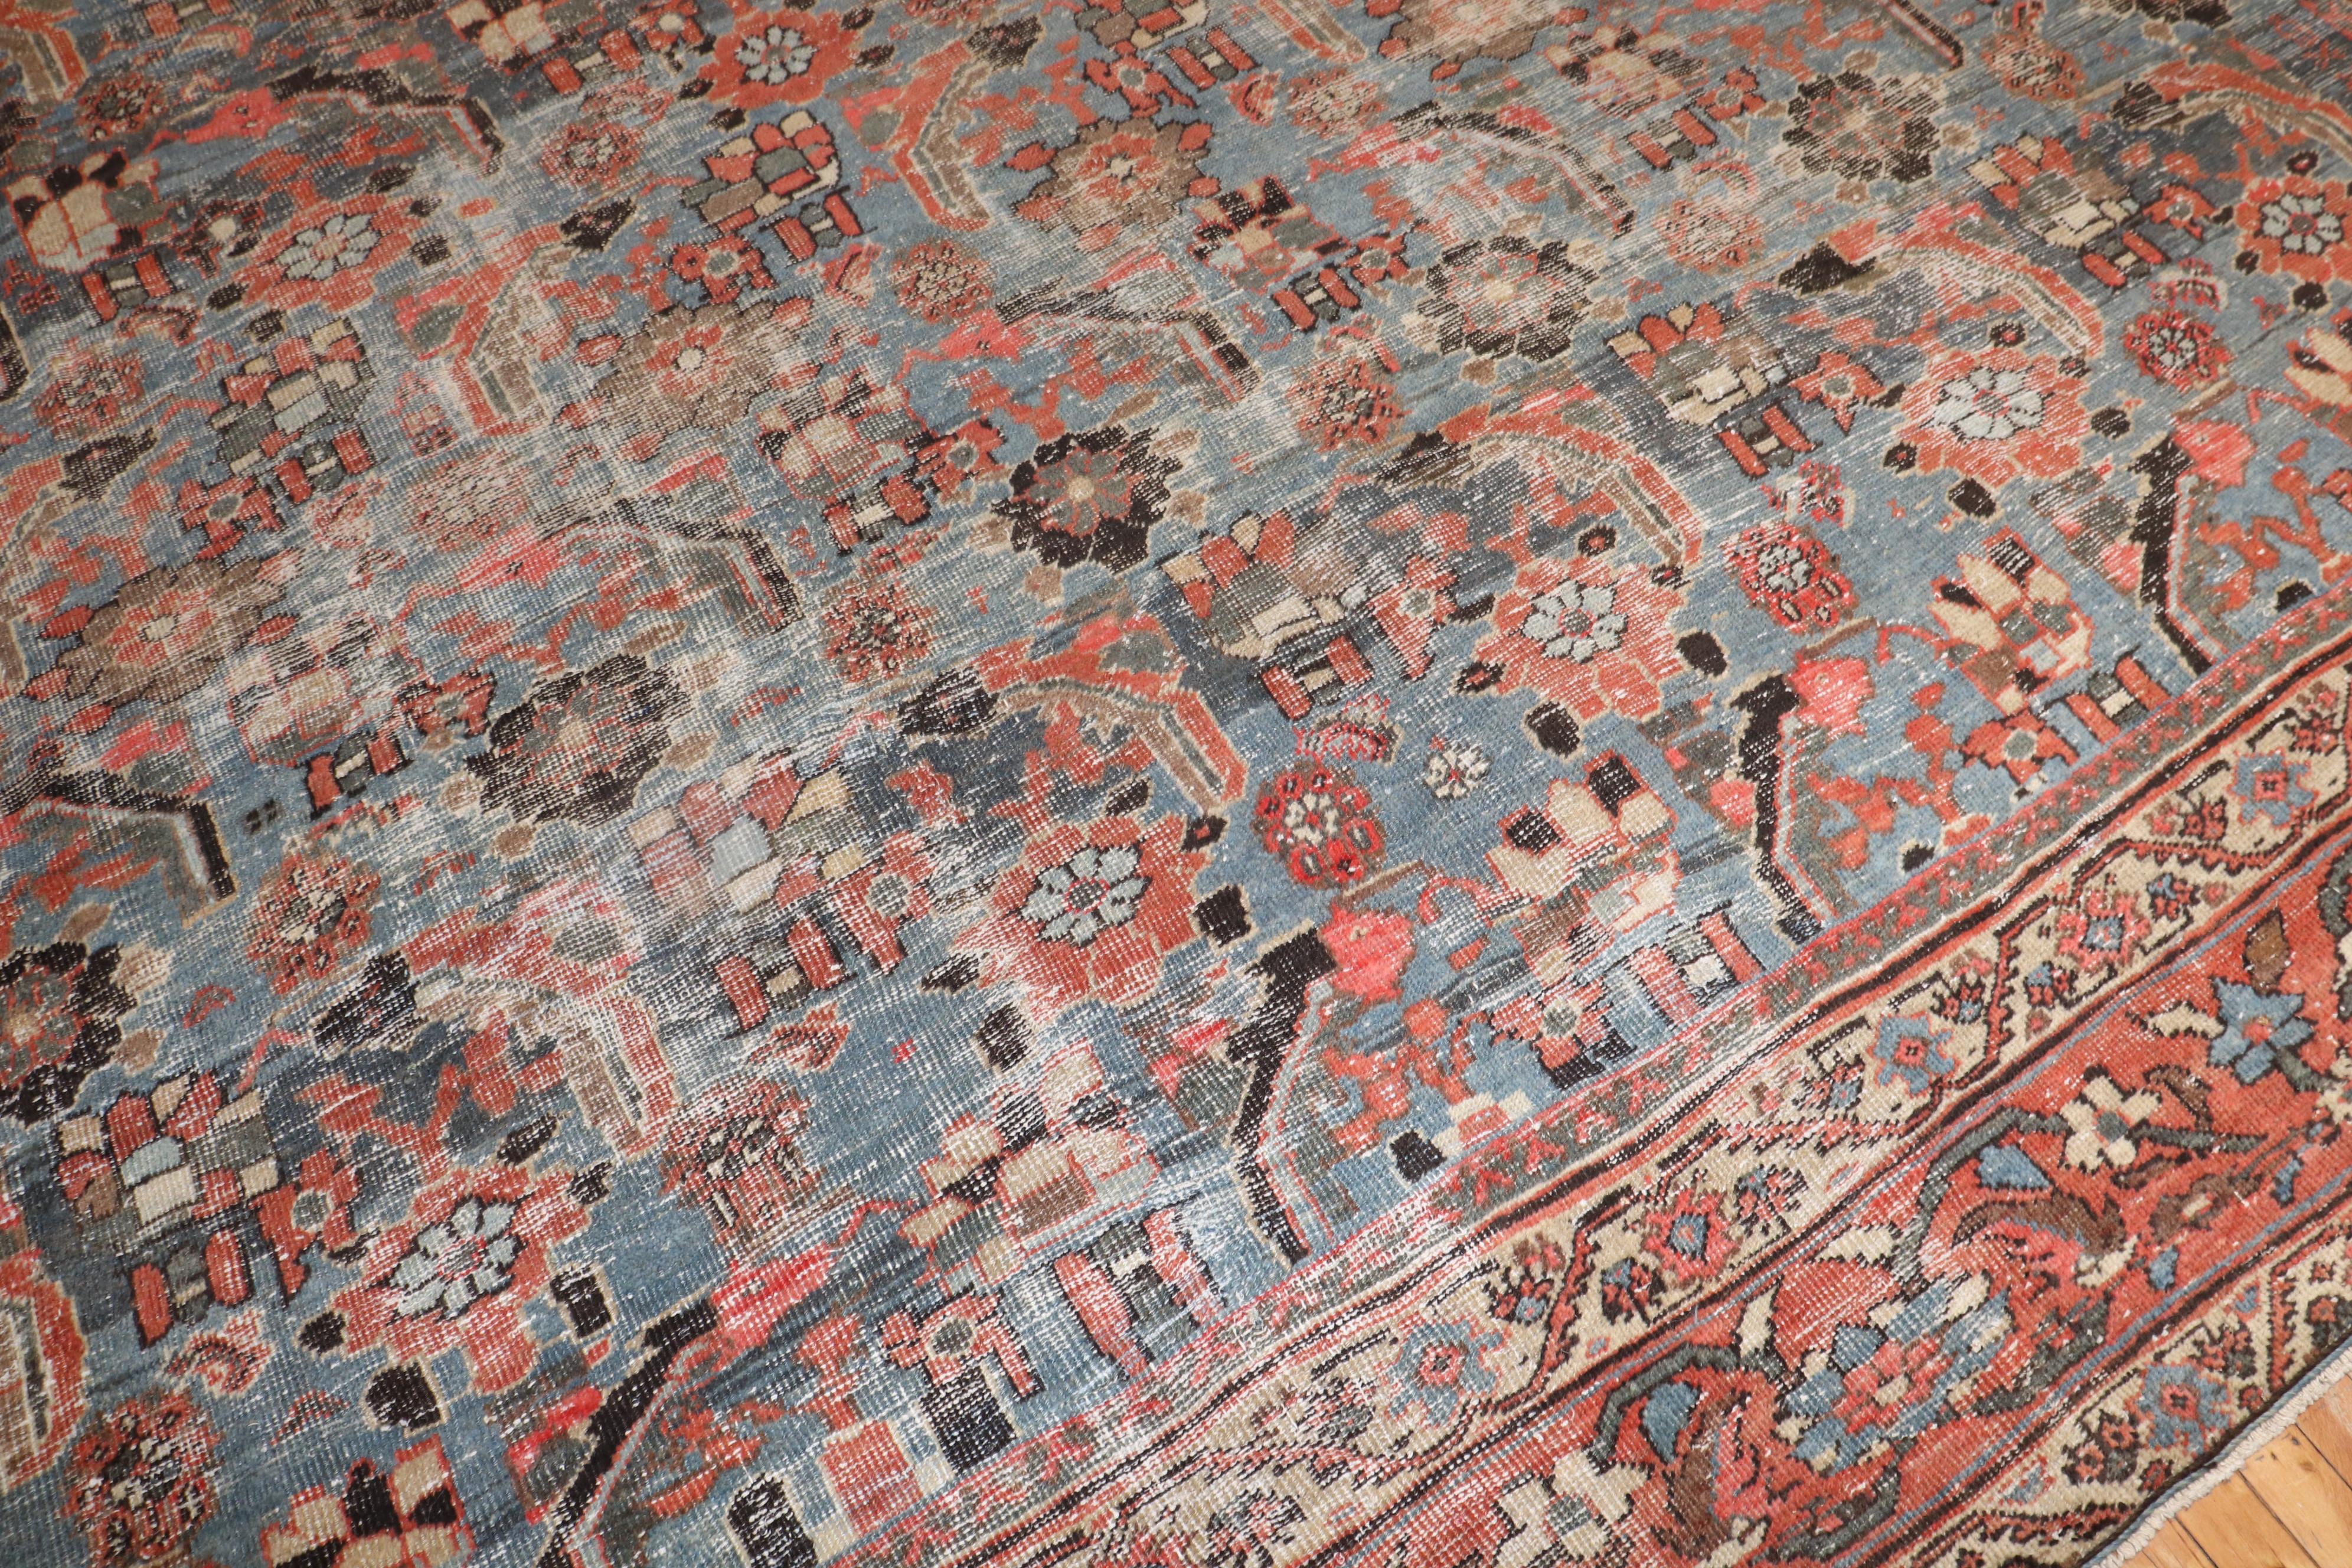 Large size early 20th century antique Persian Mahal rug with an all-over large scale geometric design on a worn blue ground.

Measures: 13'6” x 20'4